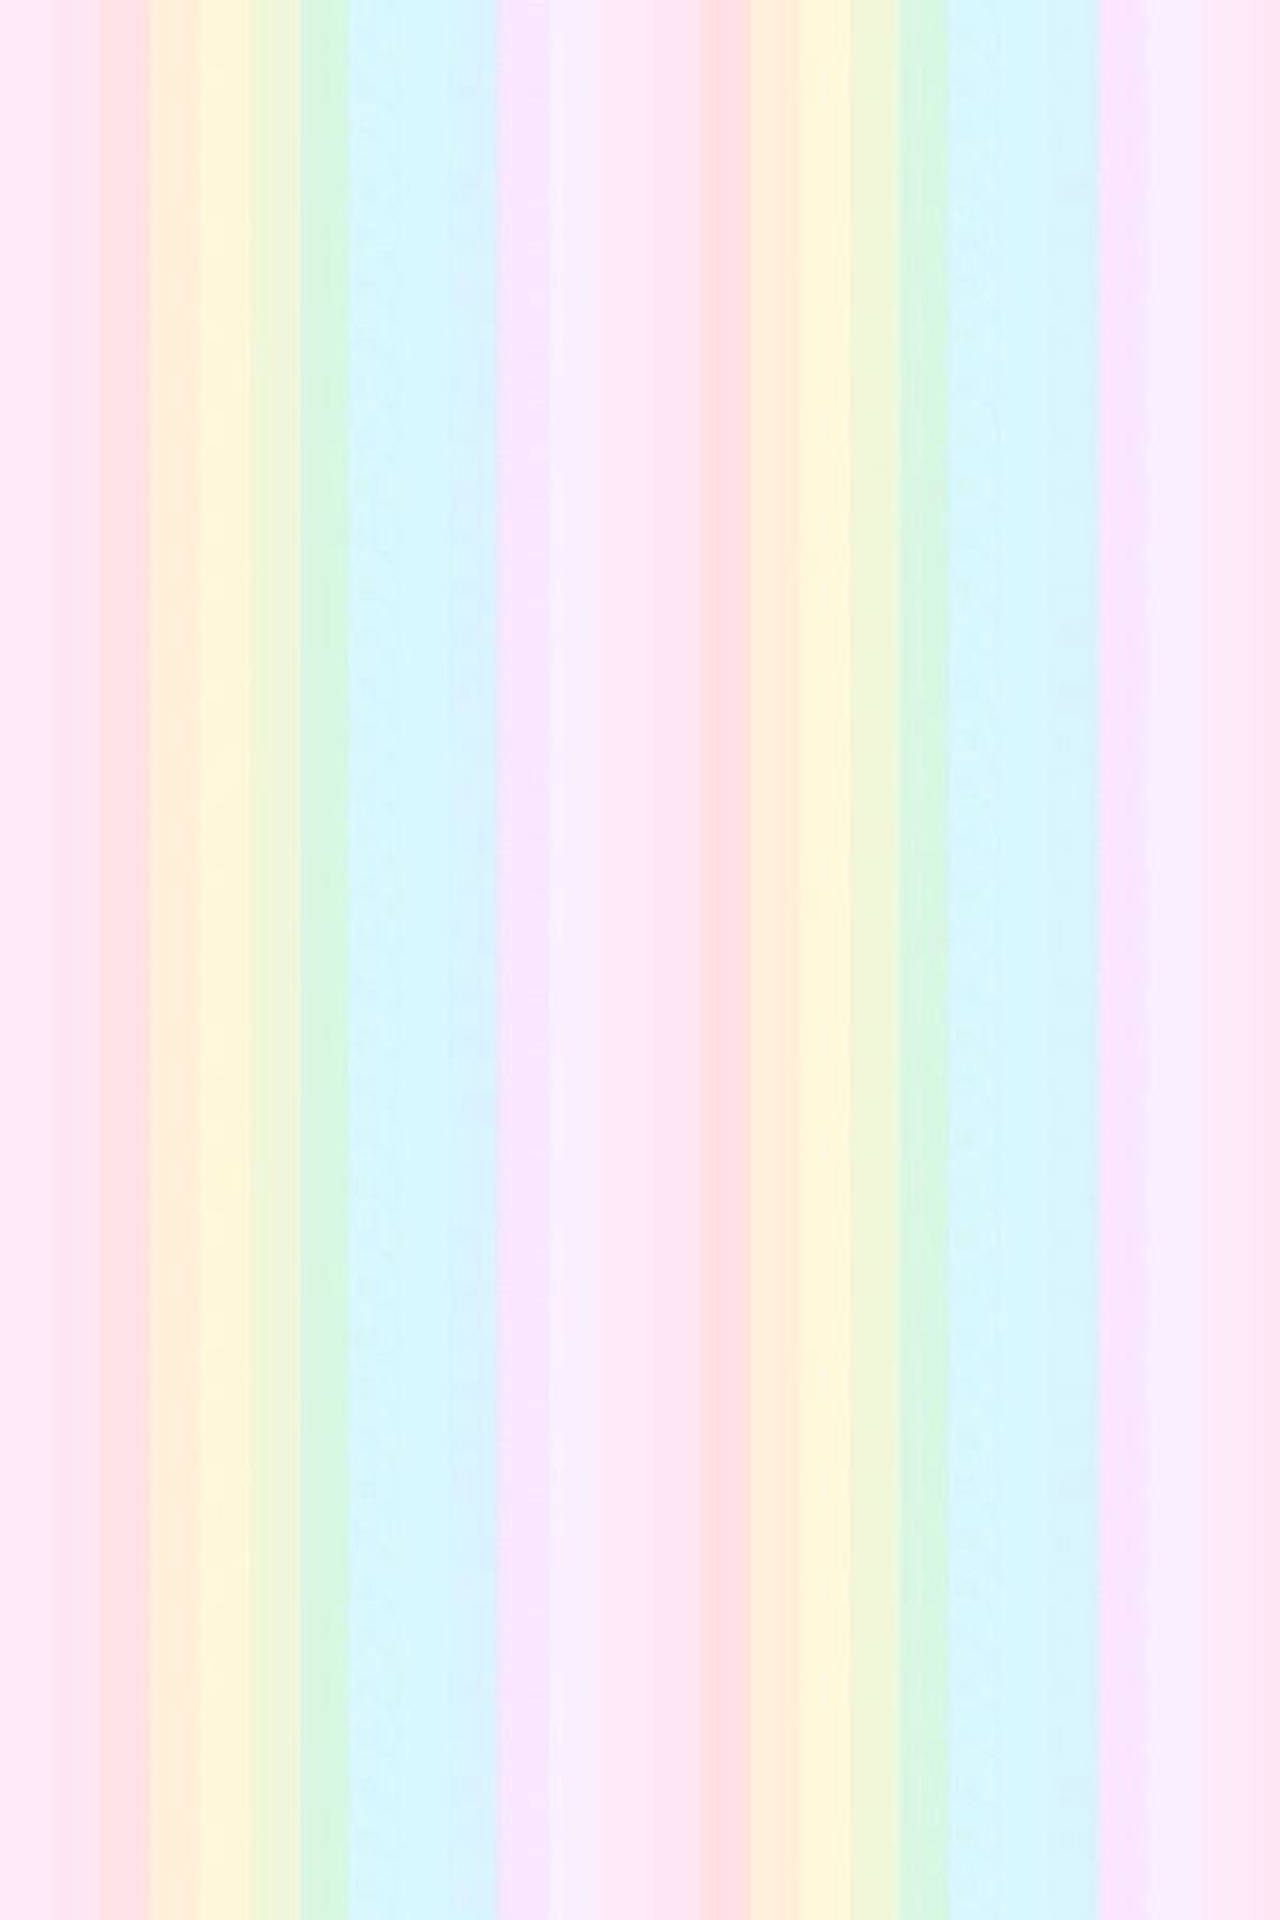 1338X2007 Pastel Rainbow Wallpaper and Background